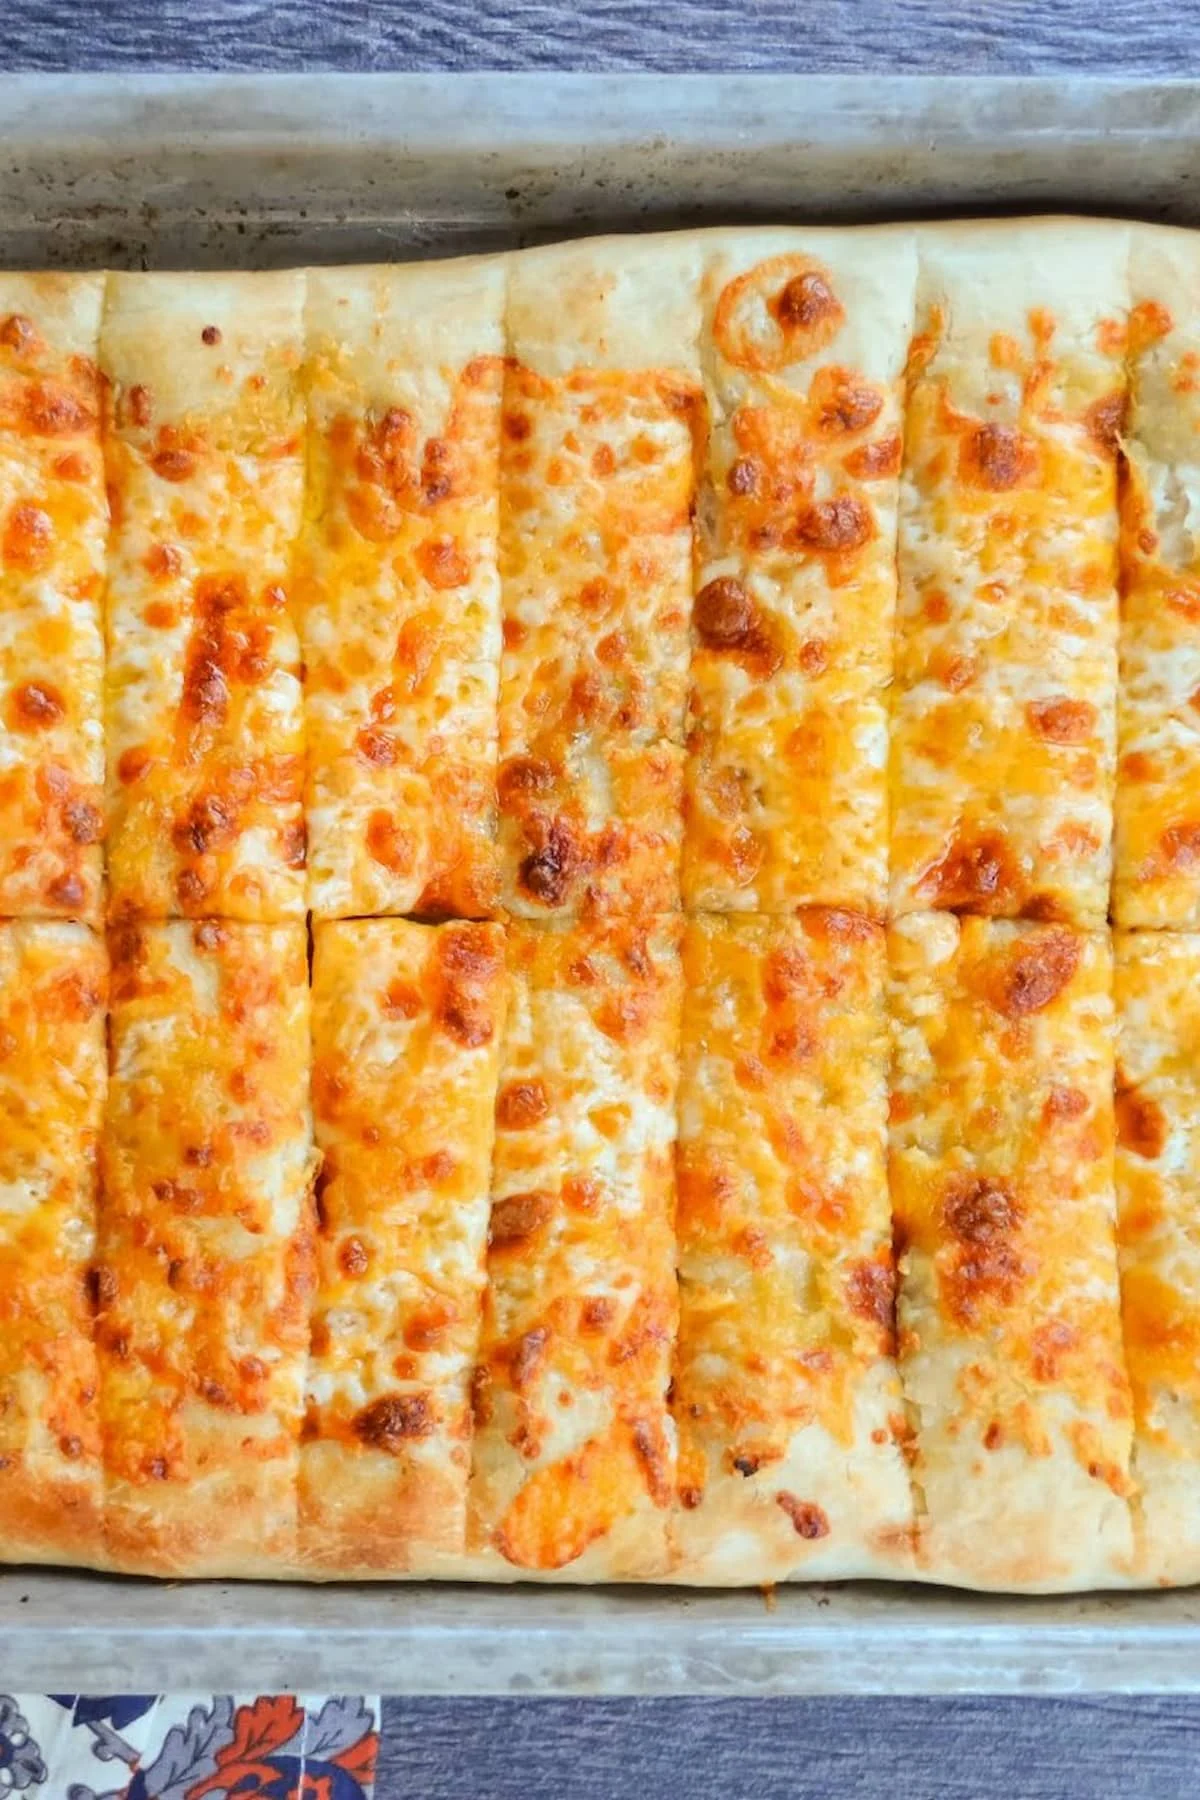 A down shot of a pan of Pizzeria Style Cheesy Breadsticks.